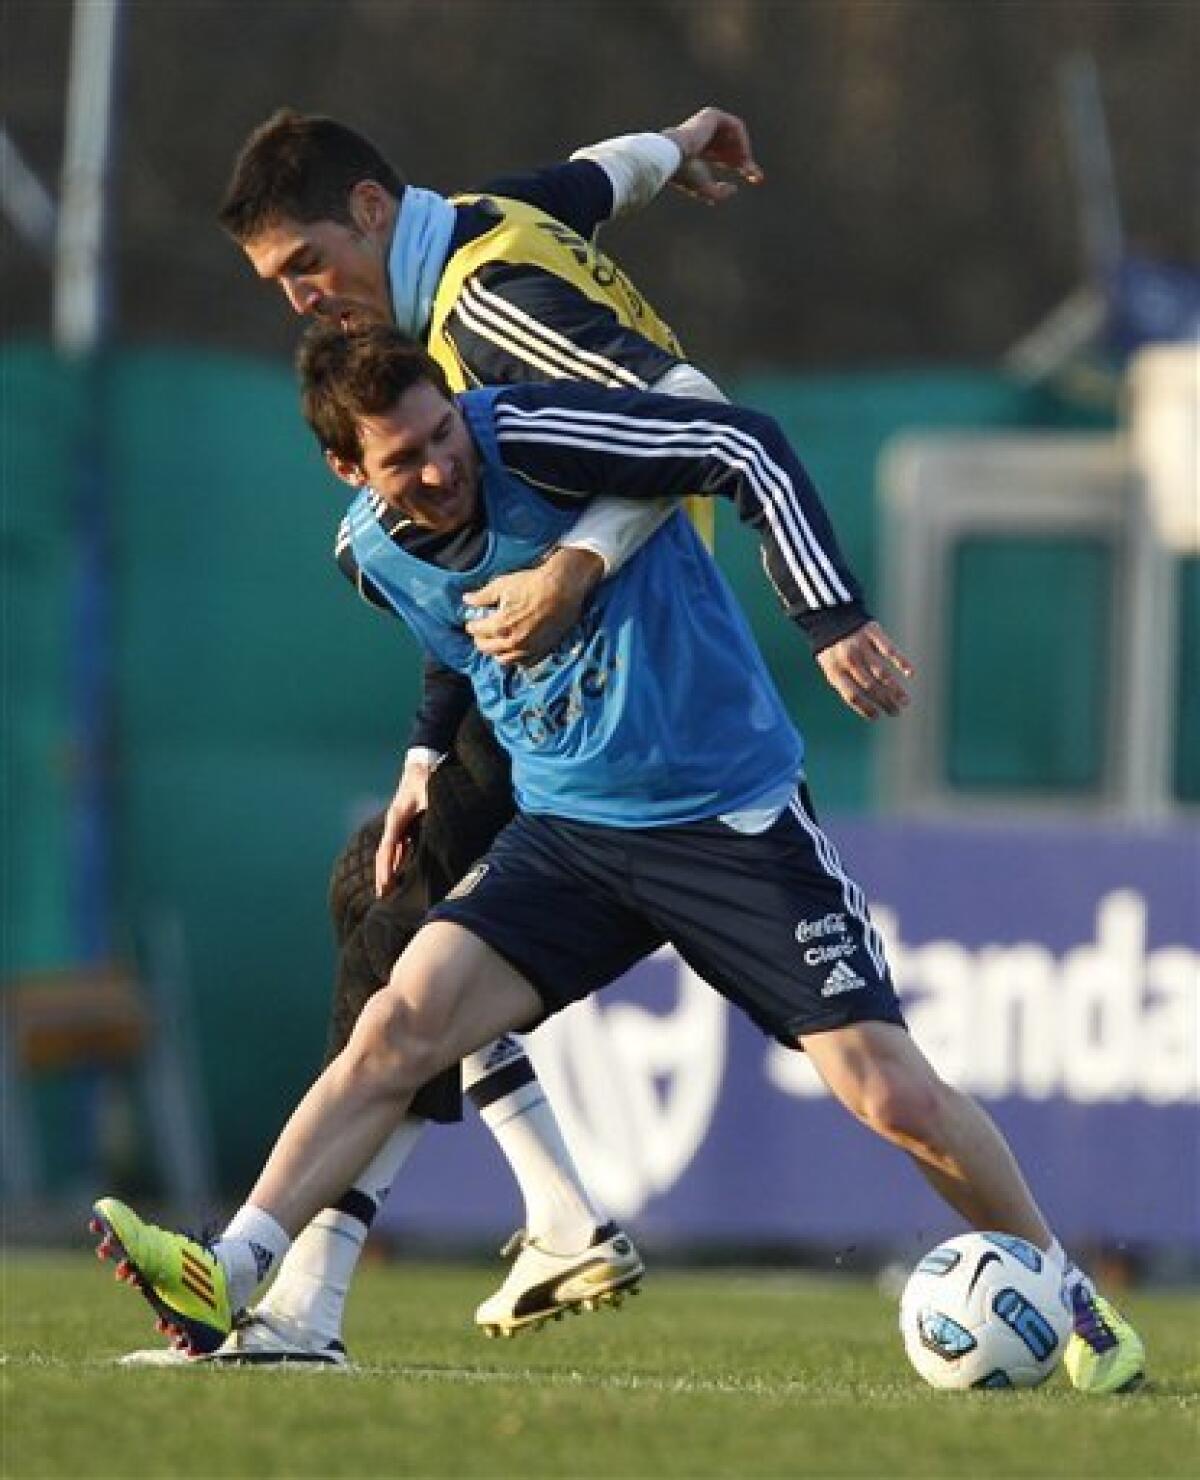 Argentina's Lionel Messi, left, fights for the ball with teammate Mariano Andujar during a training session ahead of the upcoming 2011 Copa America in Buenos Aires, Argentina, Wednesday, June 29, 2011. Argentina will host the Copa America soccer tournament July 1-24.(AP Photo/Natacha Pisarenko)